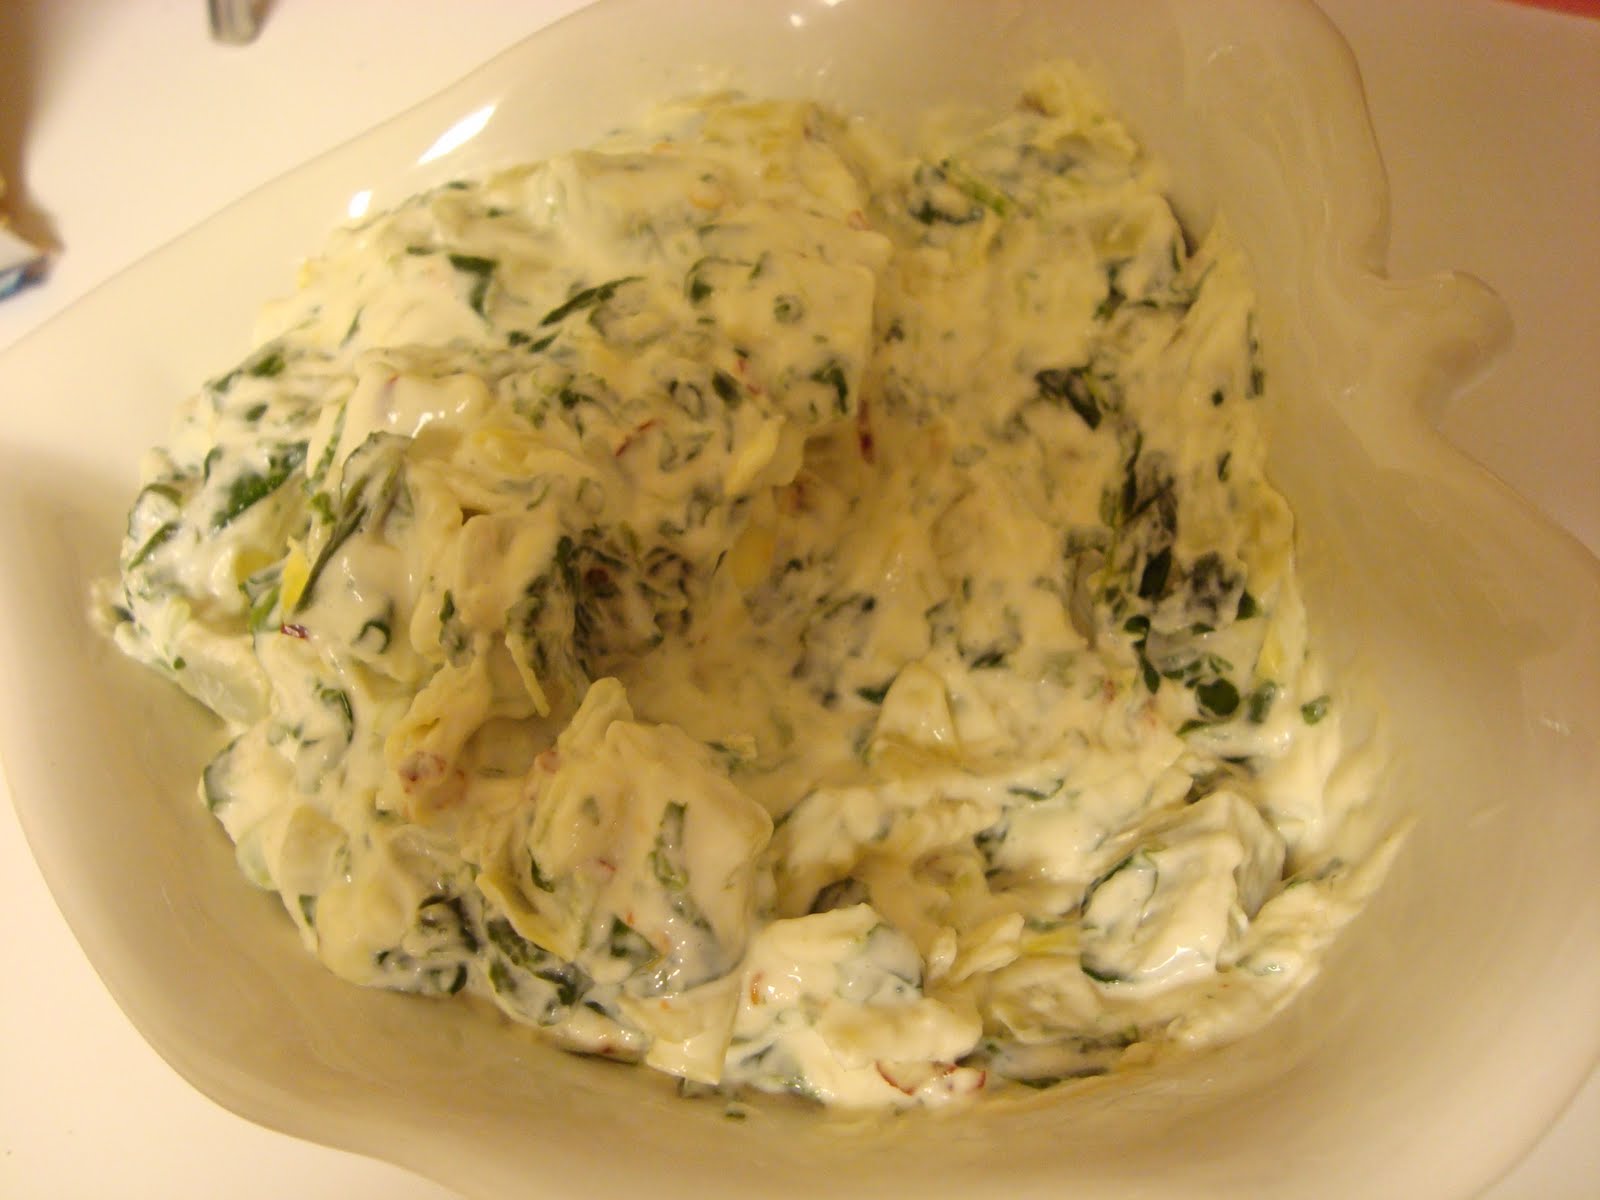 Hot Spinach Artichoke Dip Without Mayonnaise